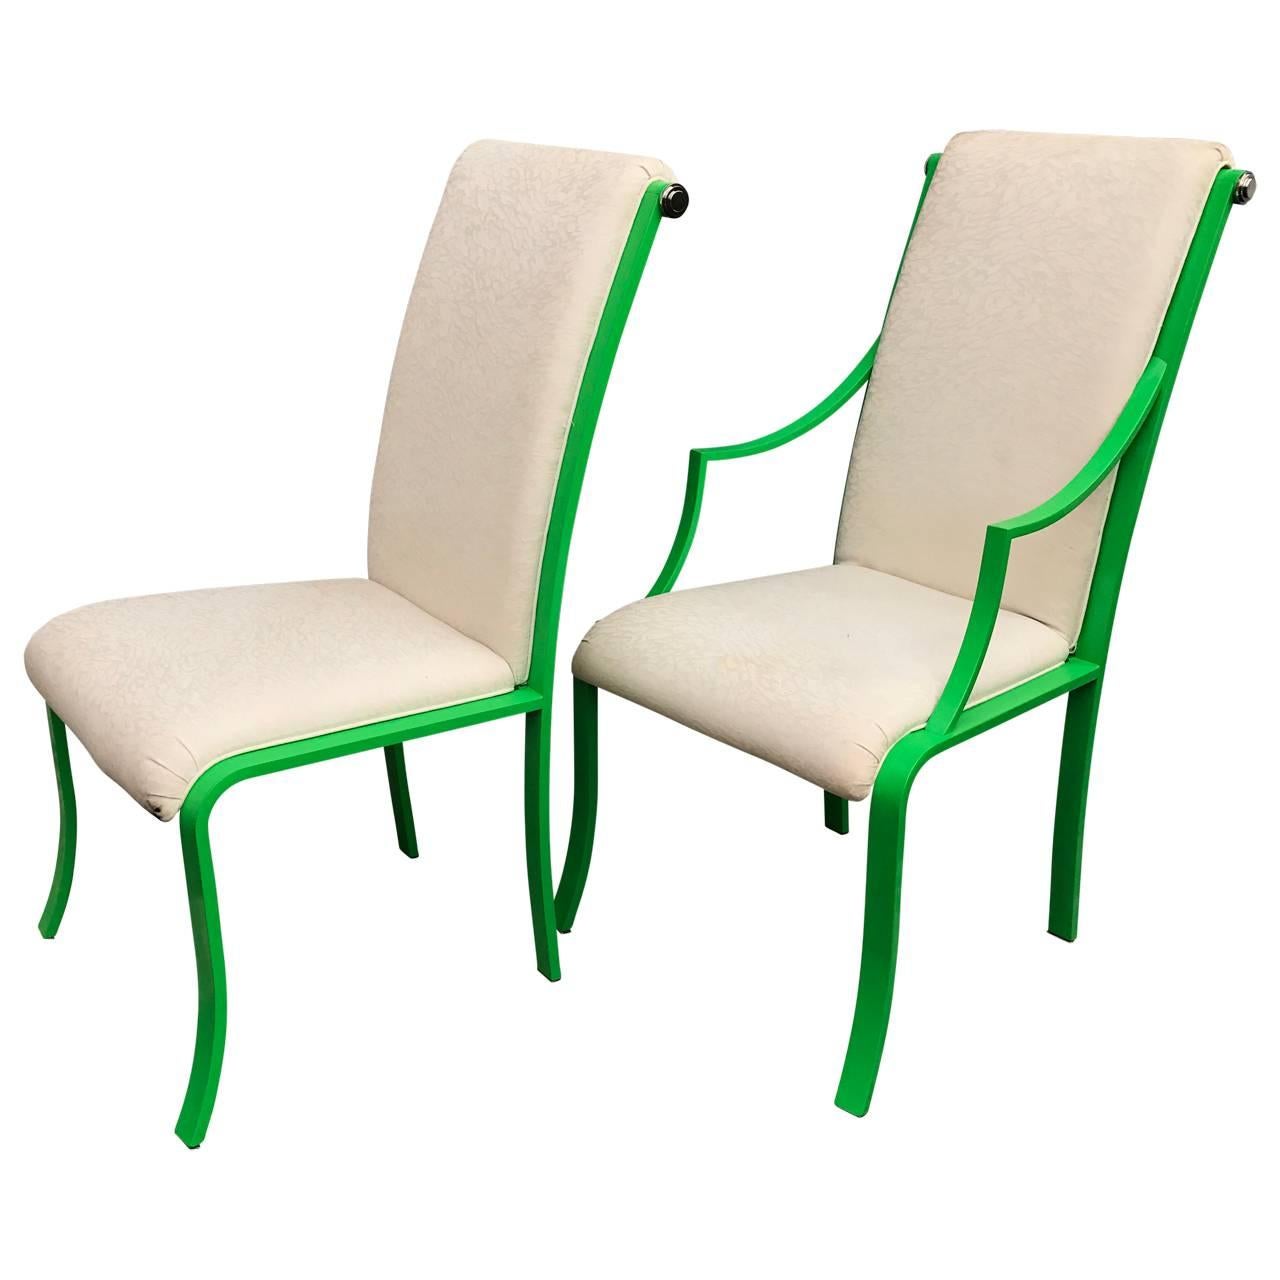 American Set of 6 Mid-Century Modern Green Powder-coated Dining Chairs